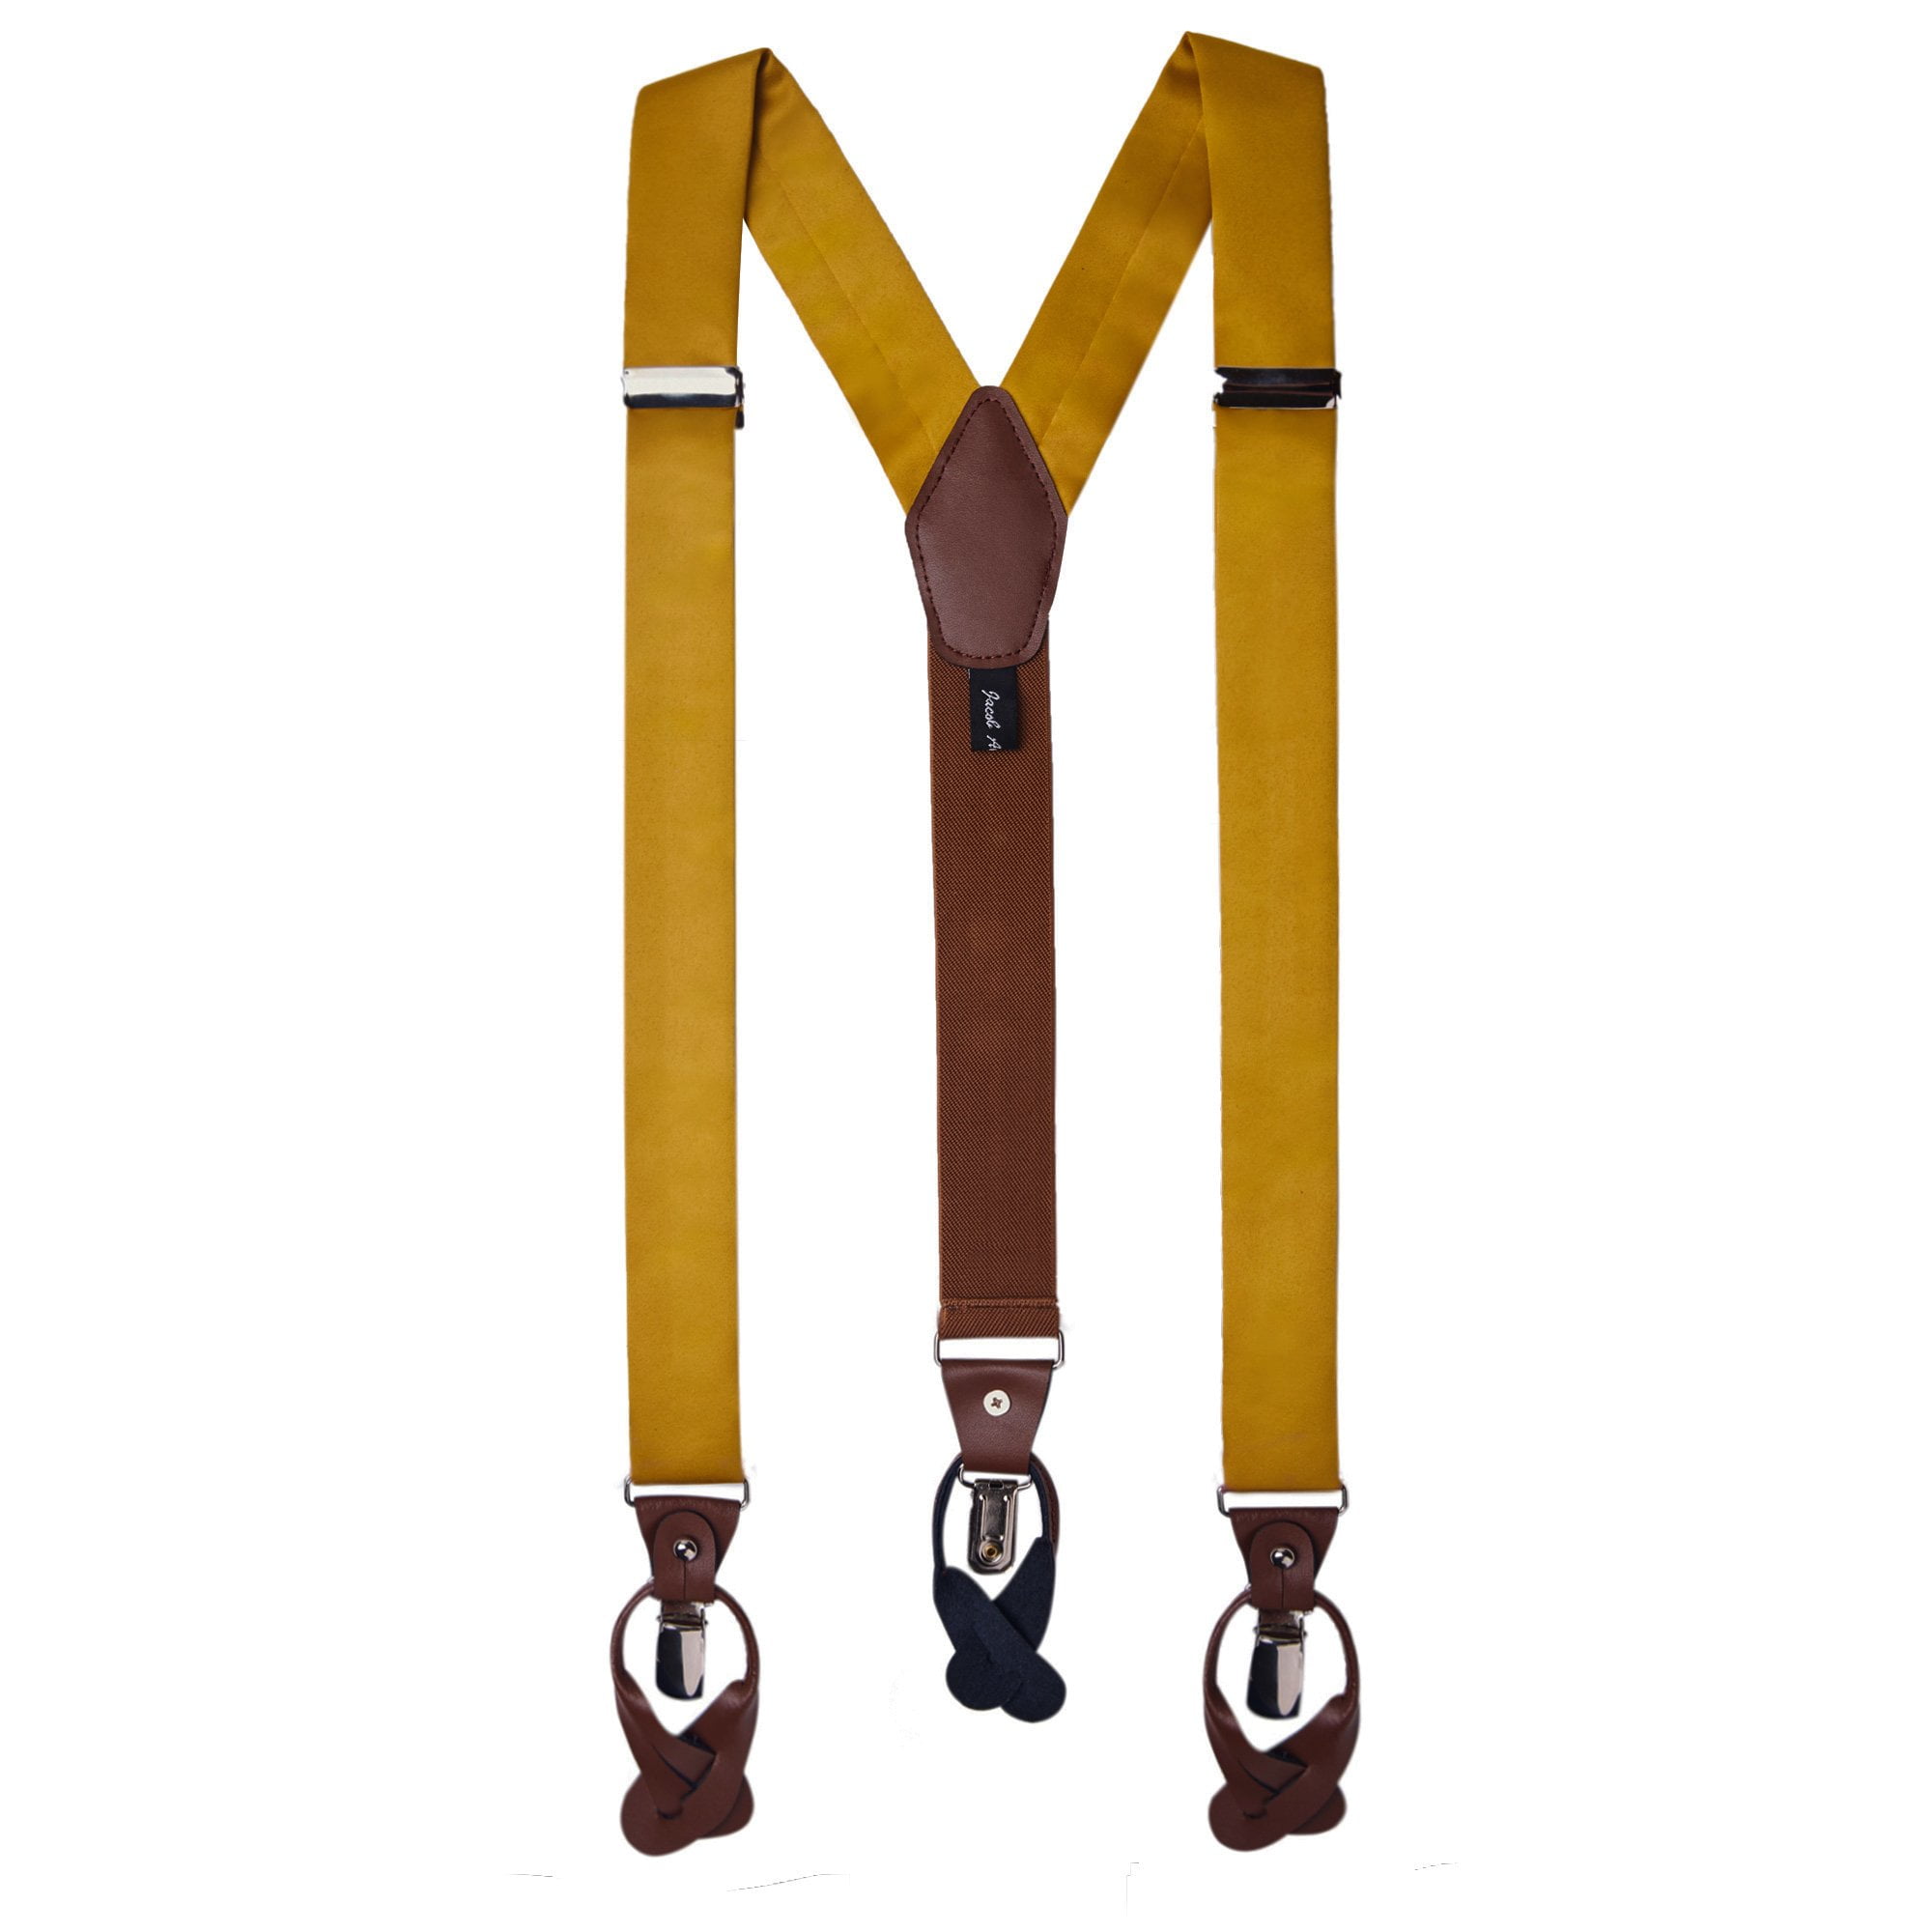 Jacob Alexander Mens Solid Y-Back Suspenders Braces Convertible Leather Ends Clips Gold